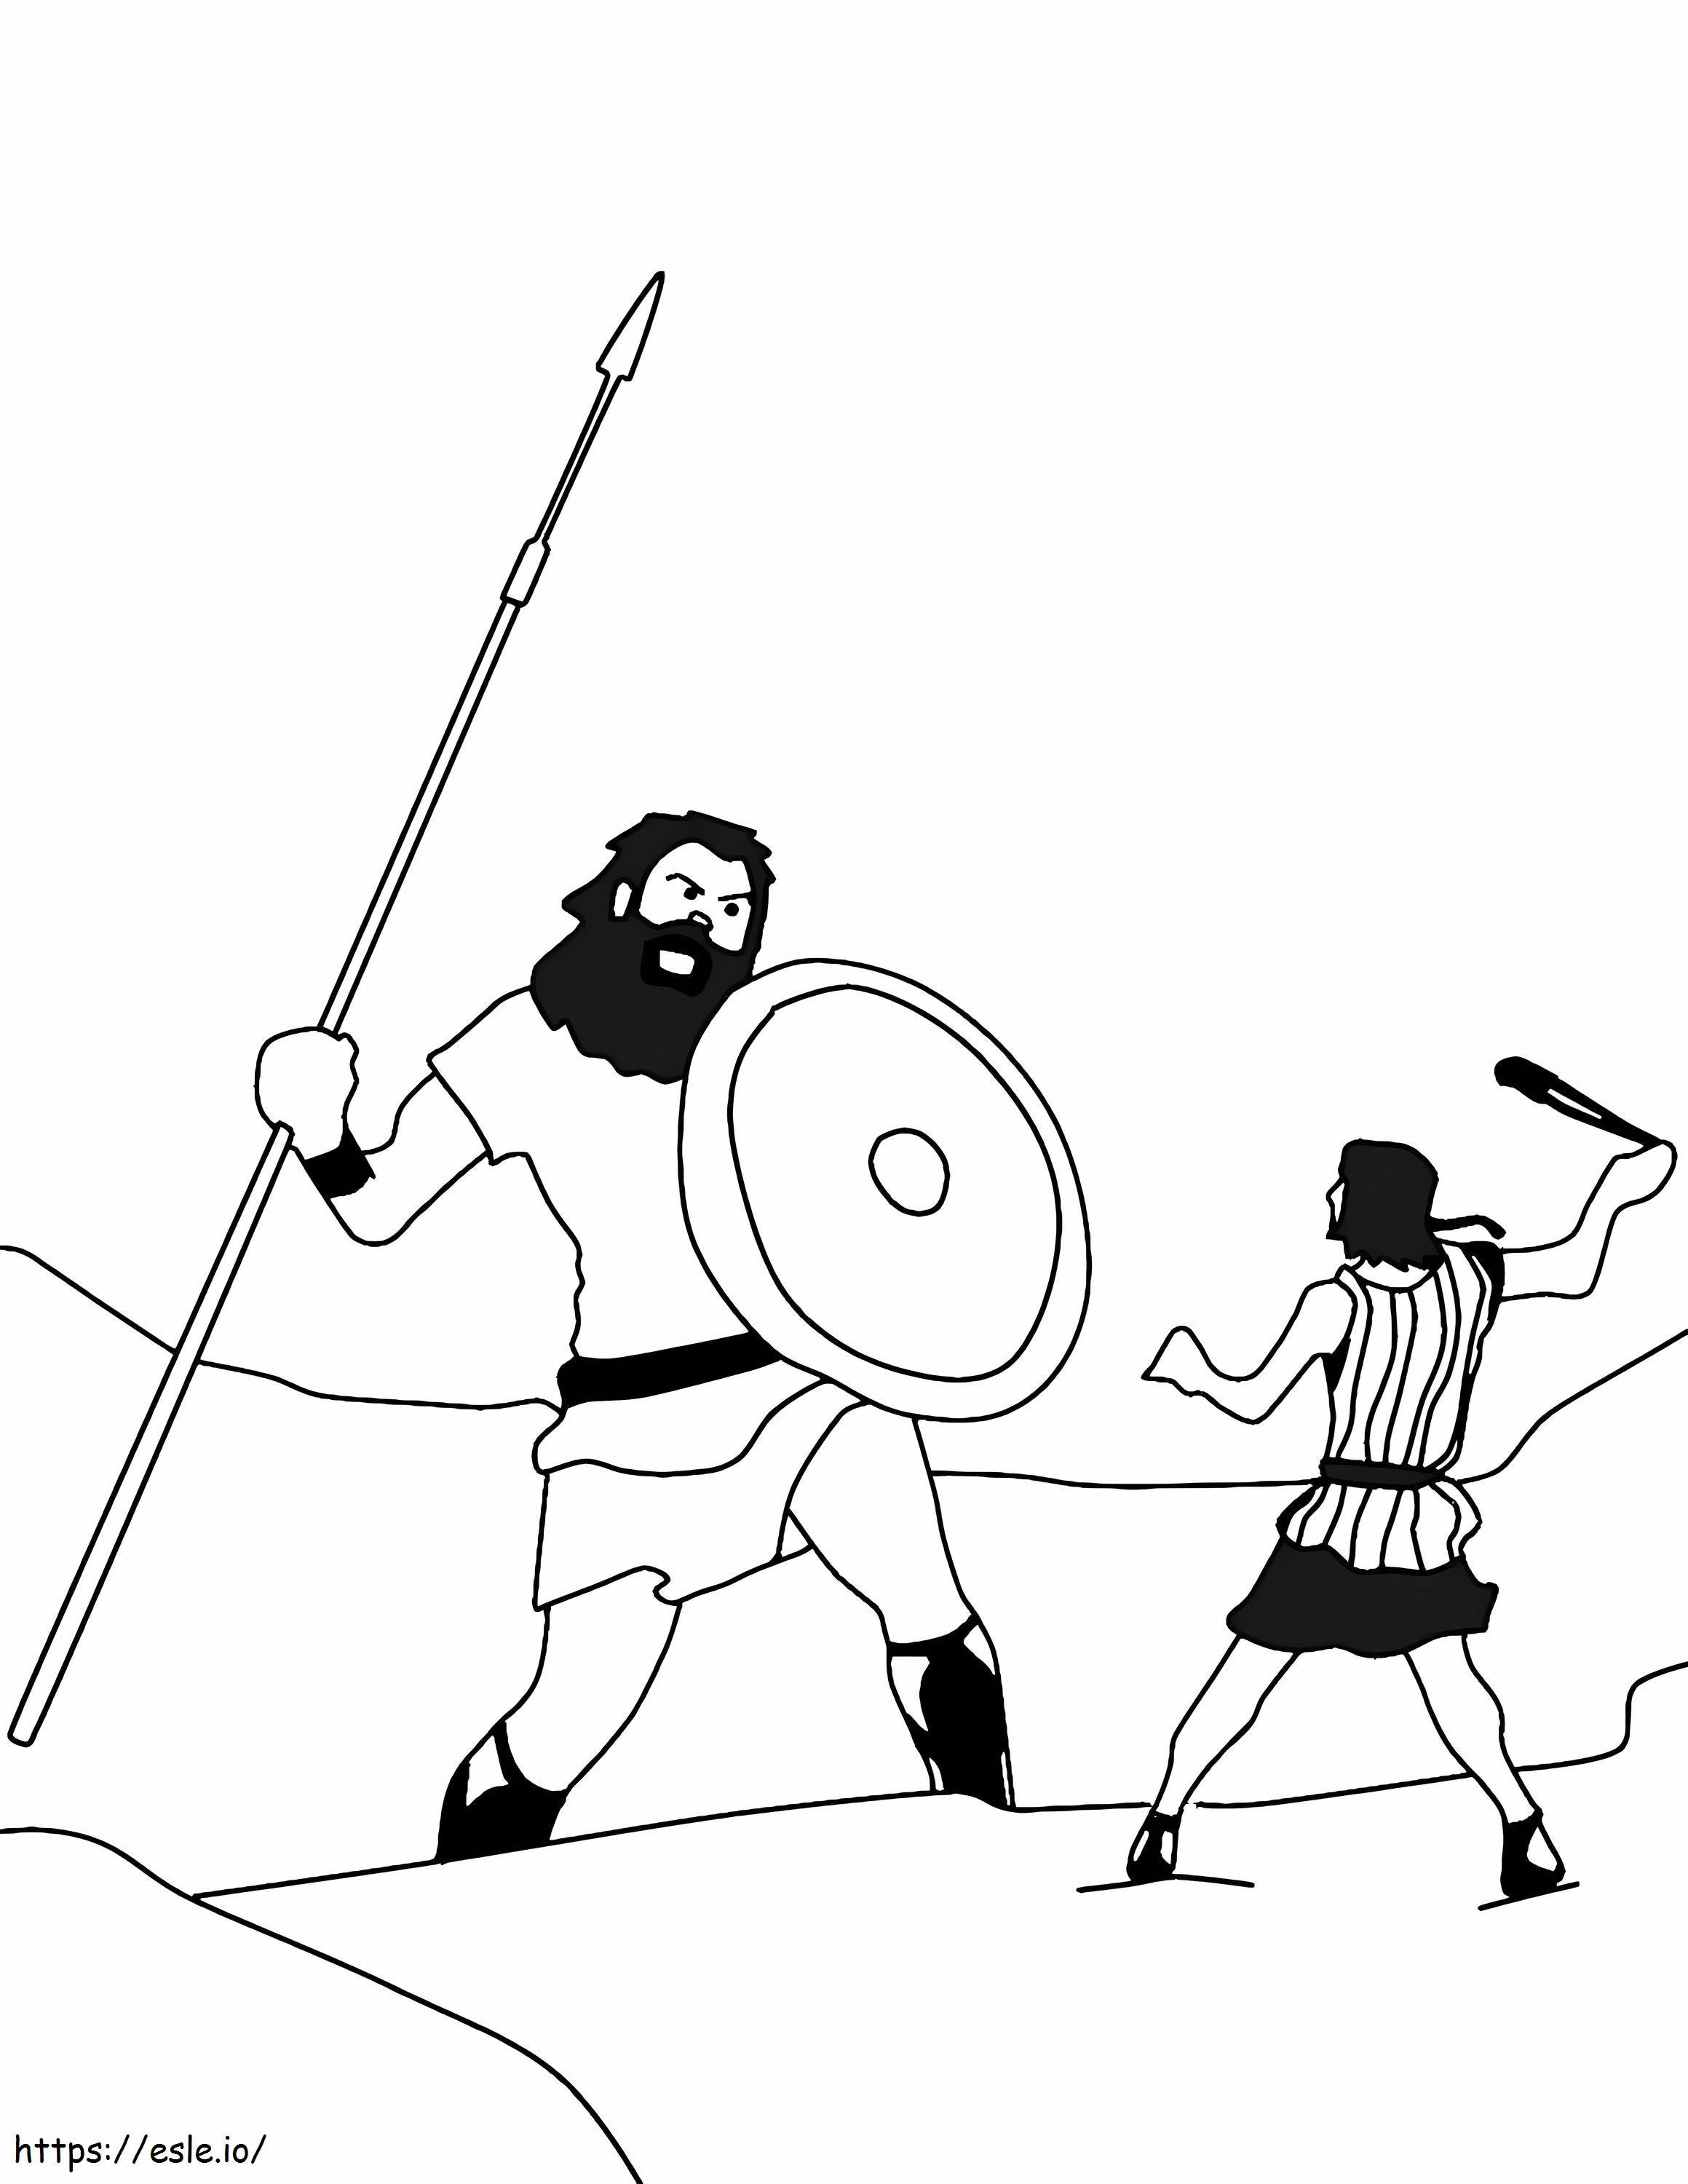 1576742794 David And Goliath coloring page